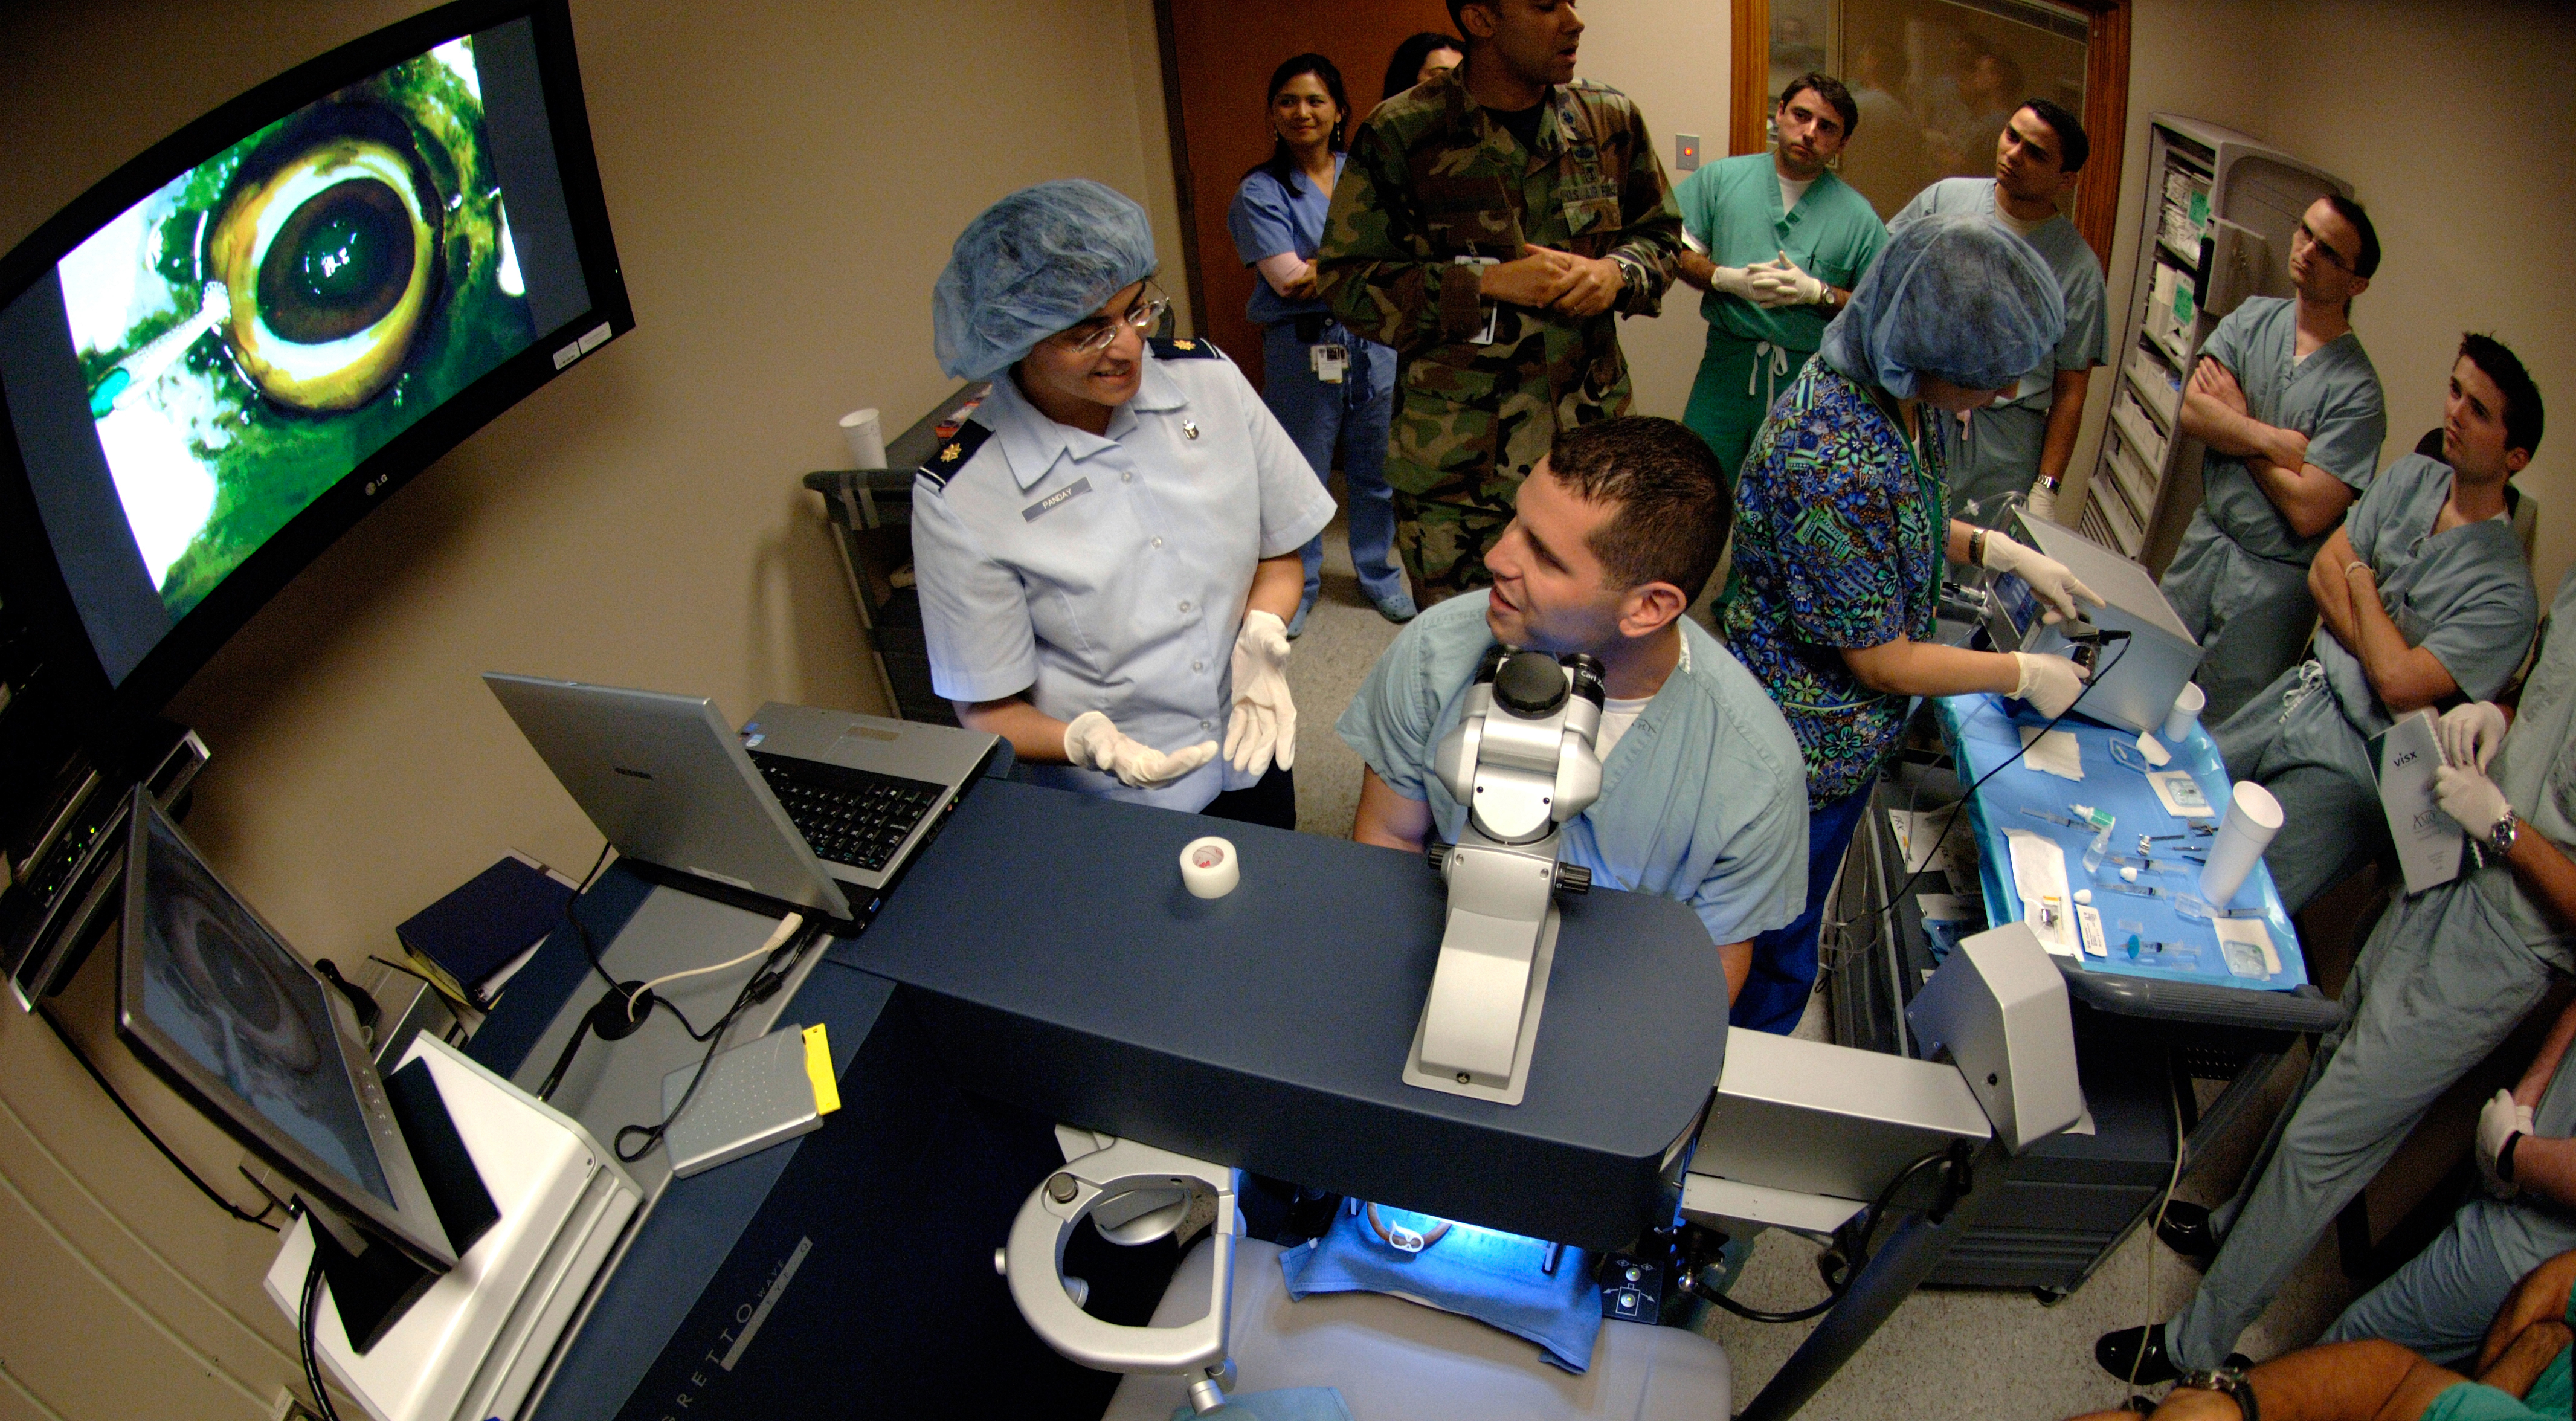 Ophthalmology Residency Program top accreditation 59th Medical Wing > Article